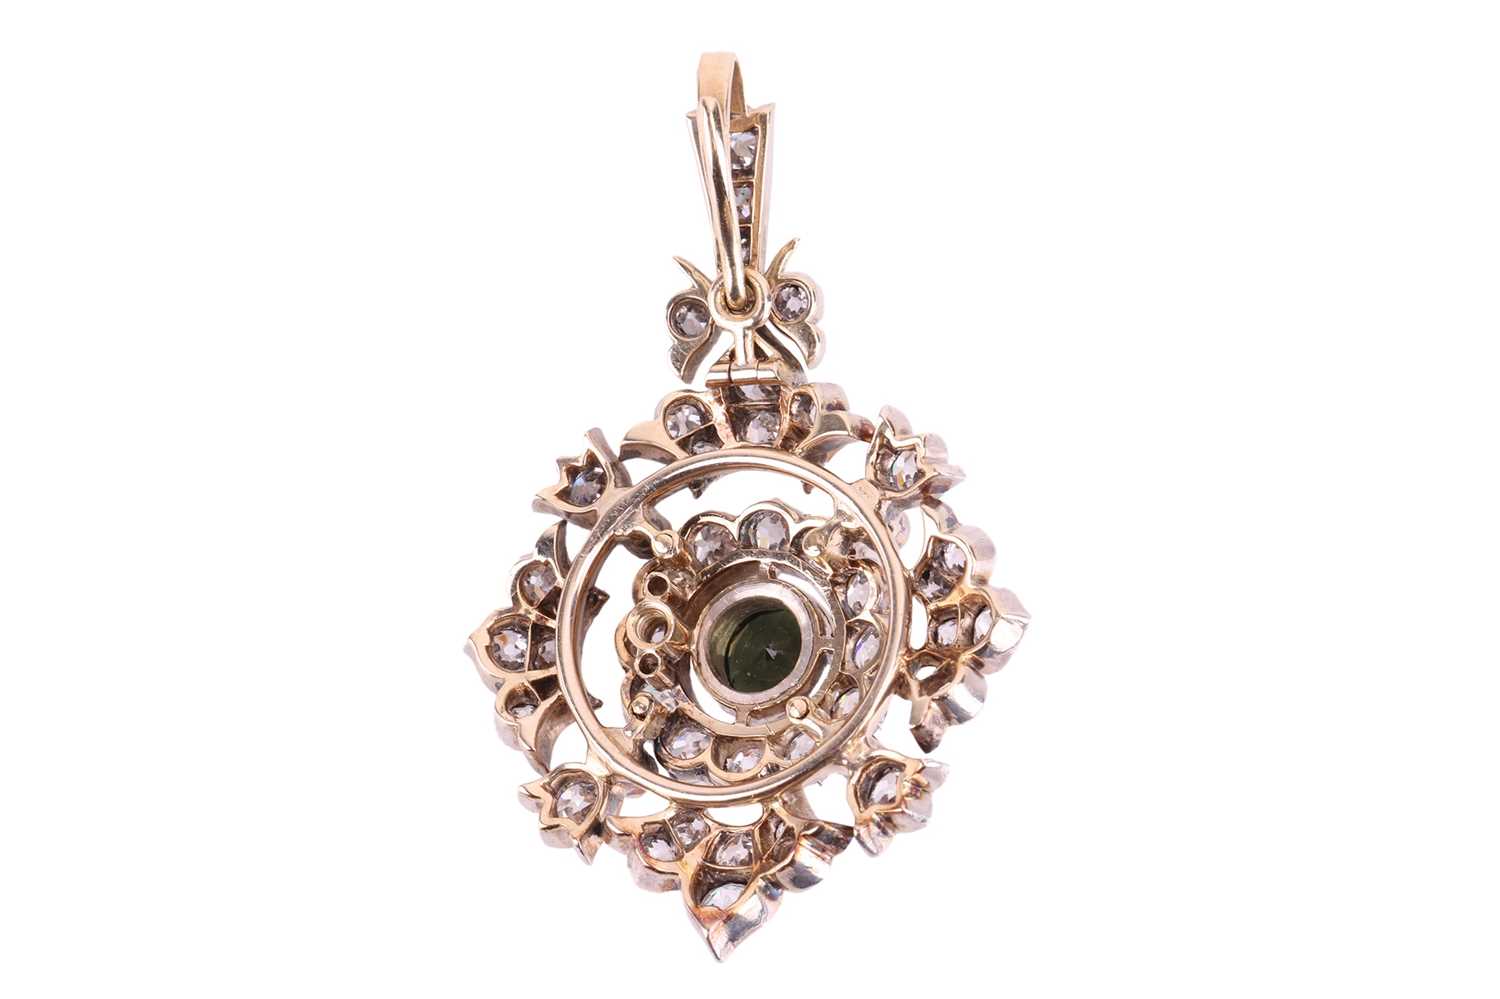 An Edwardian diamond and tourmaline guirlande pendant, with a round centrally-set dark green tourmal - Image 3 of 3